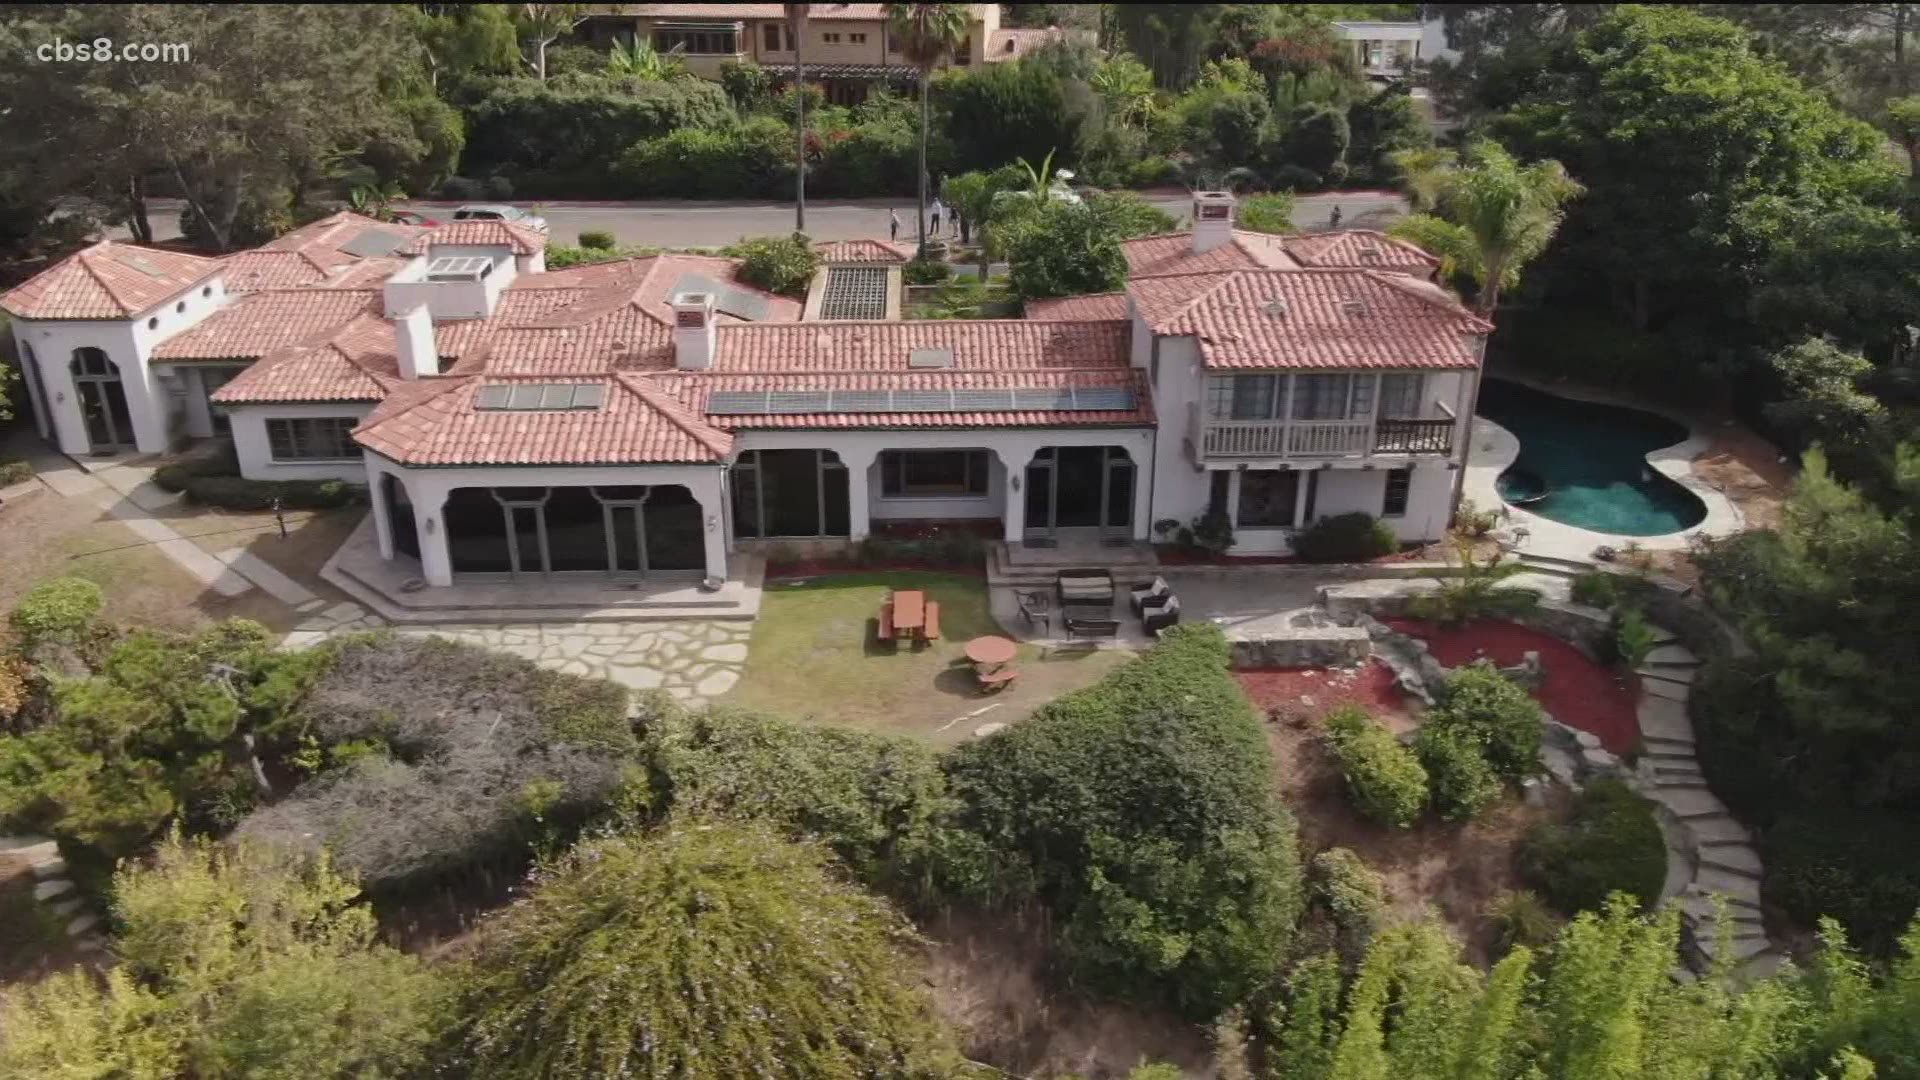 City officials said the oceanfront mansion has been the subject of at least 30 calls to the San Diego Police Department.